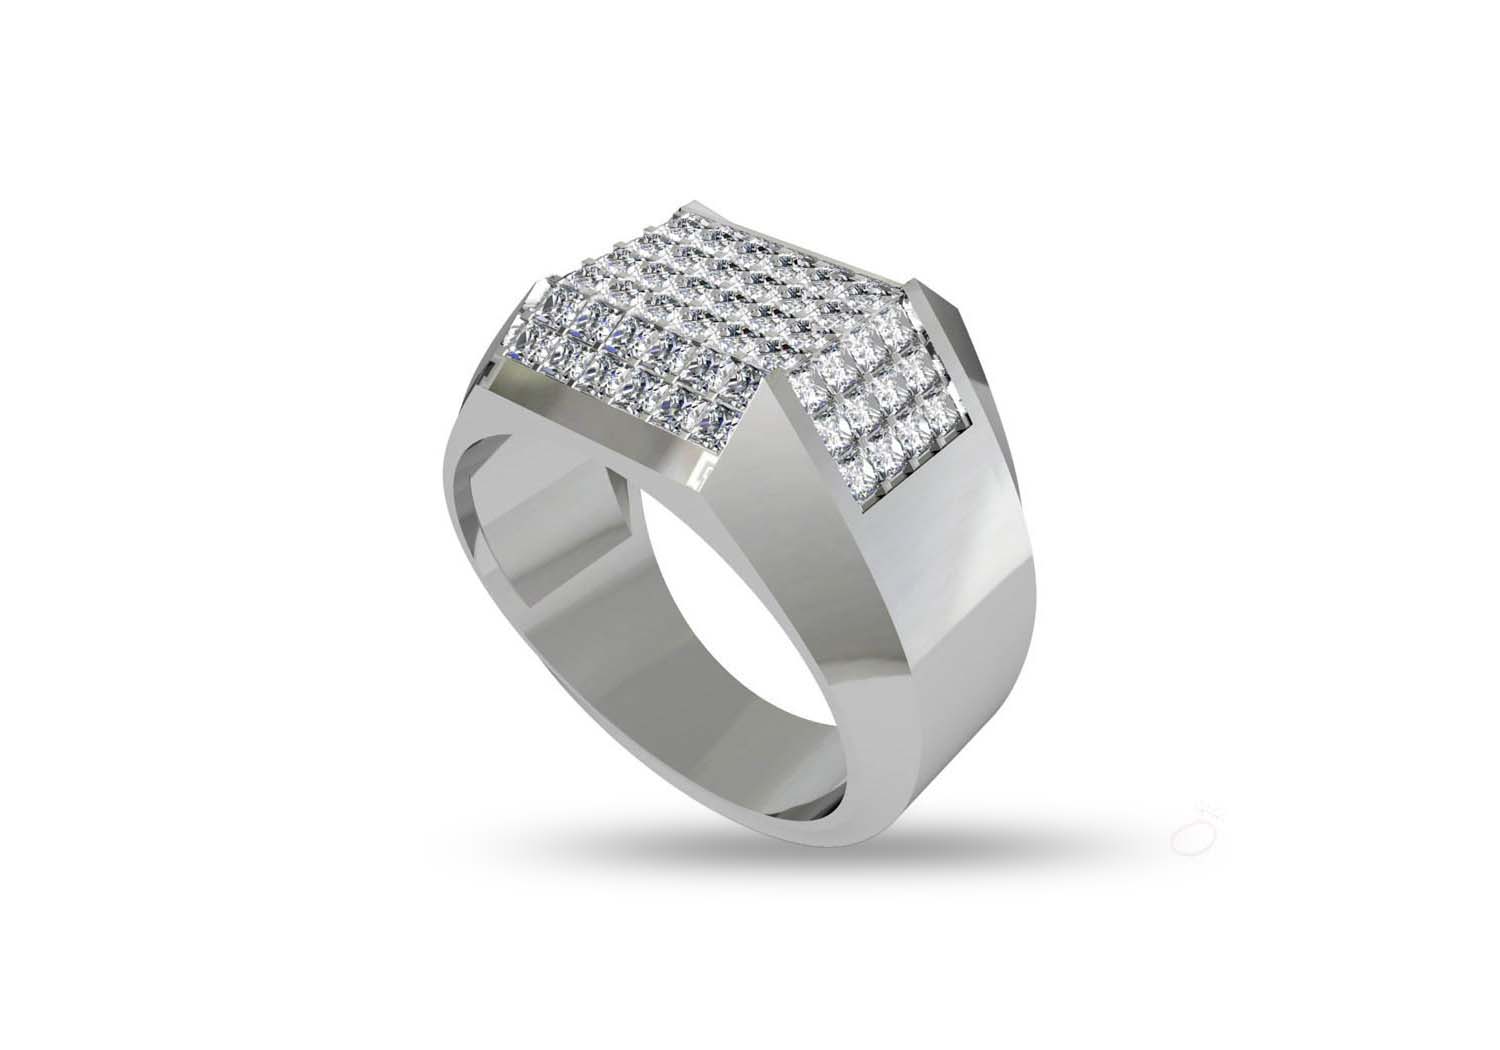 Silver Rings For Men - Buy Pure Silver Rings for Men Online | Myntra